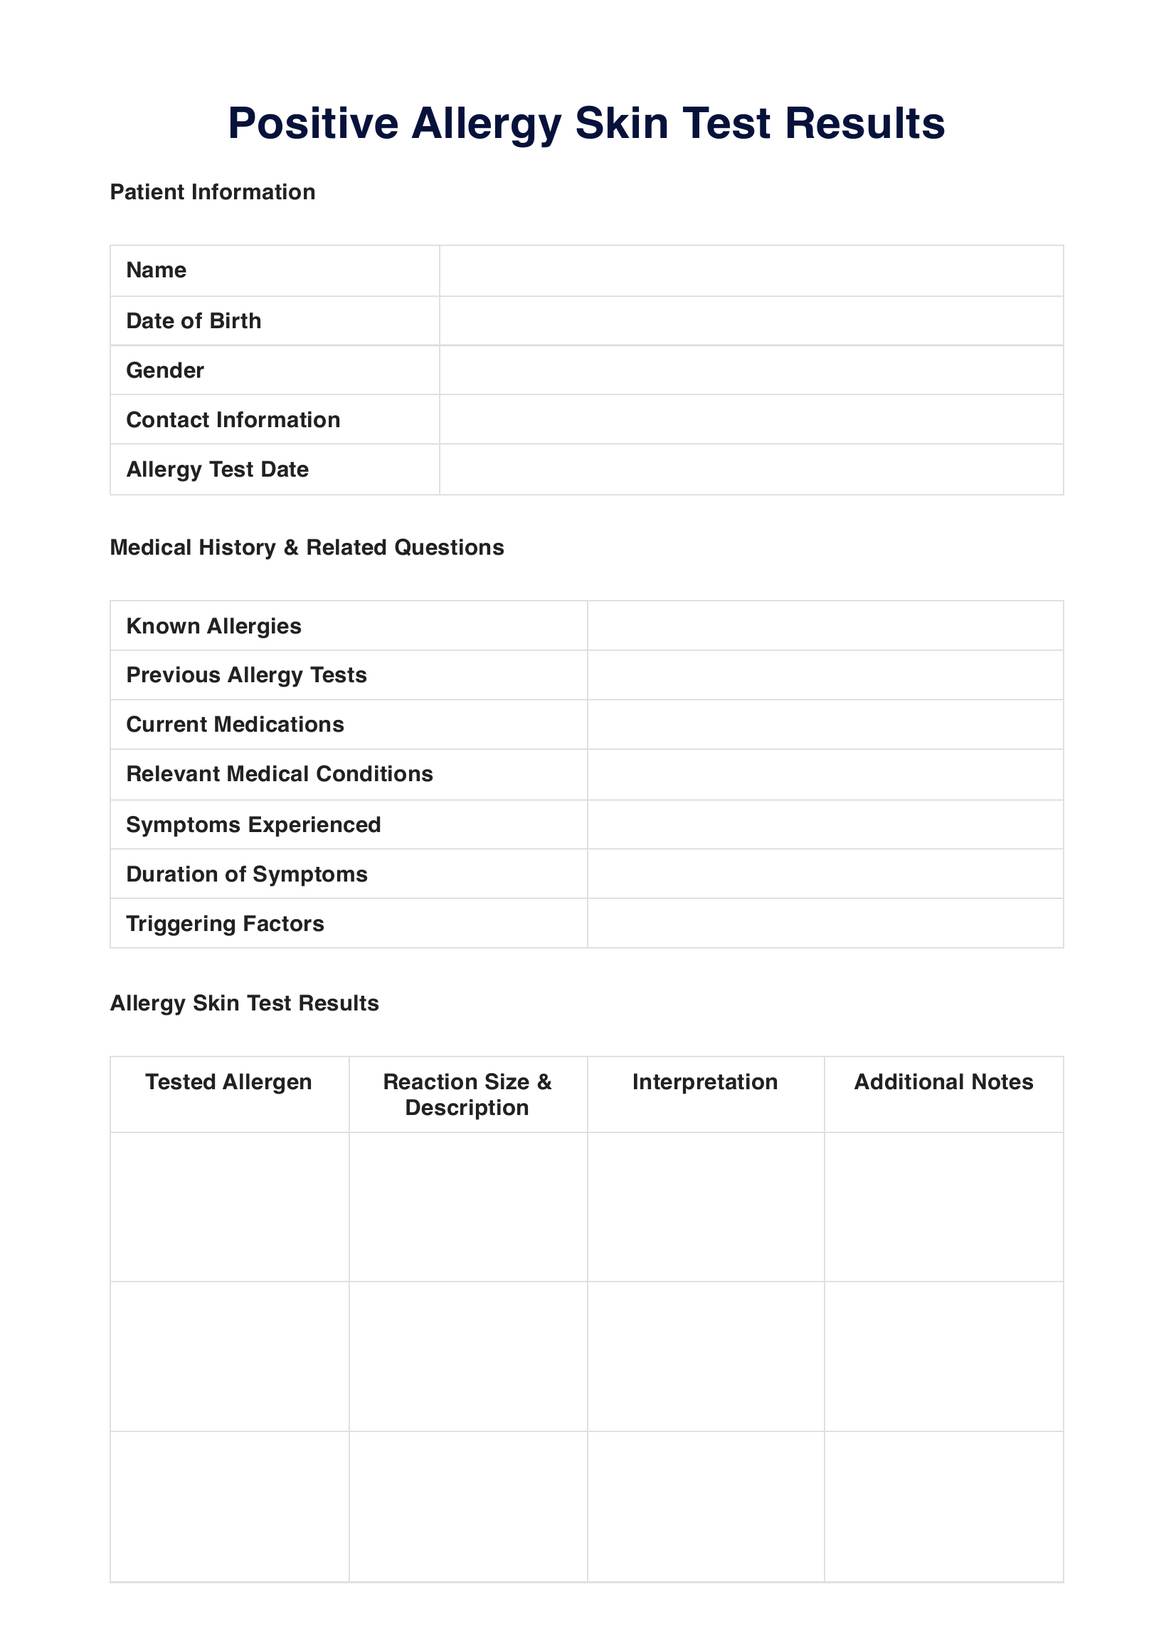 Positive Allergy Skin Test Results Chart PDF Example